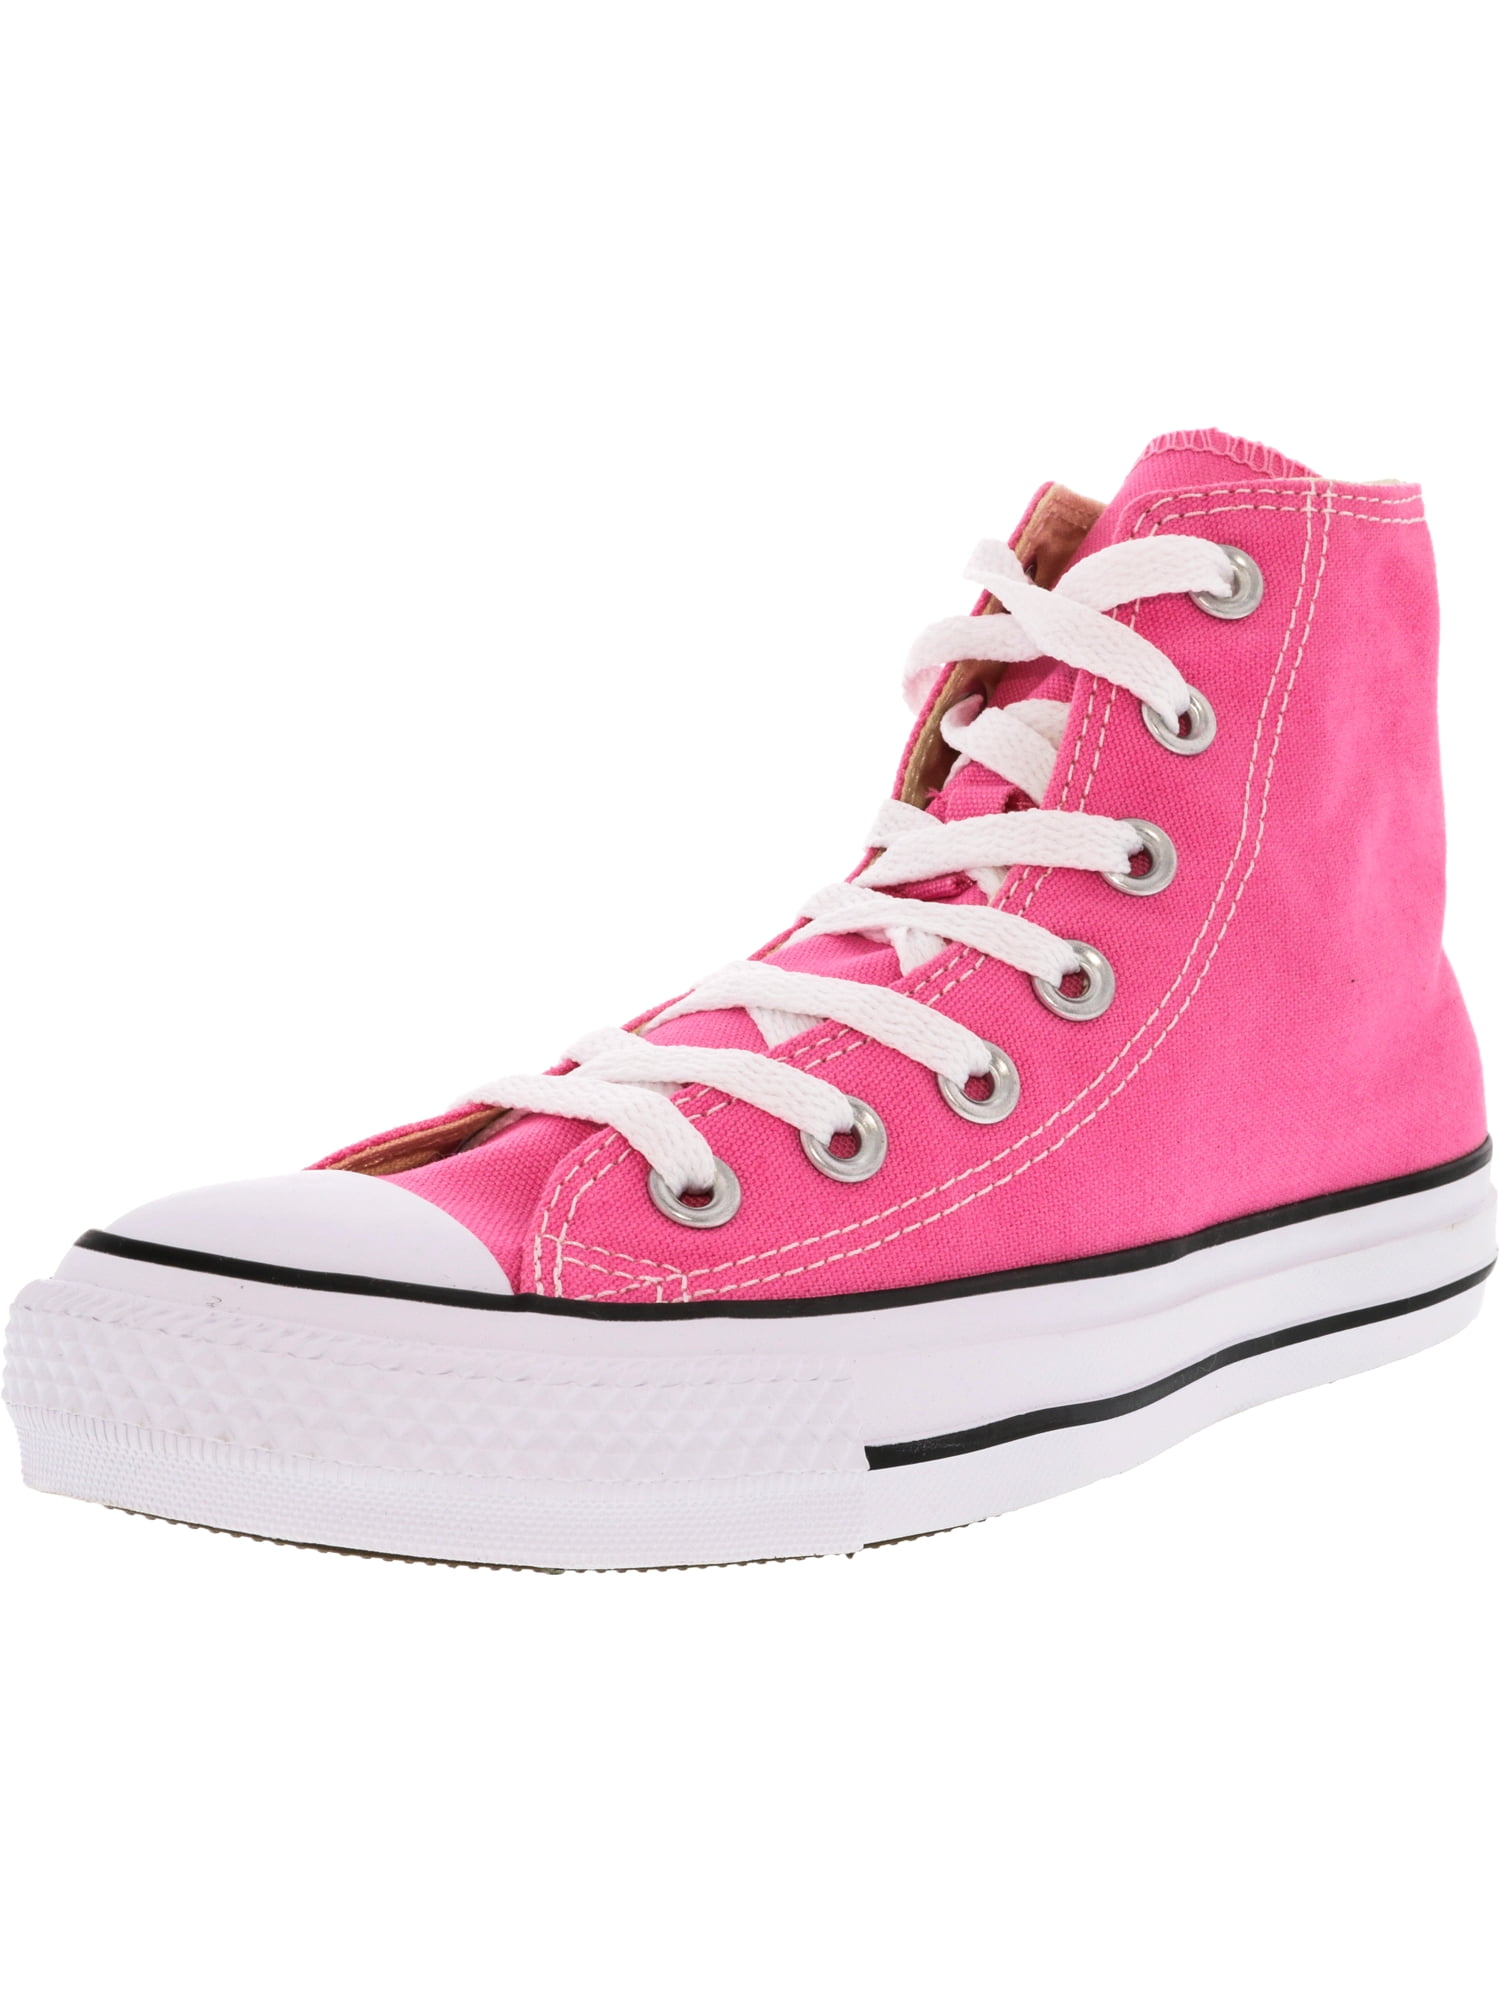 pink adult converse